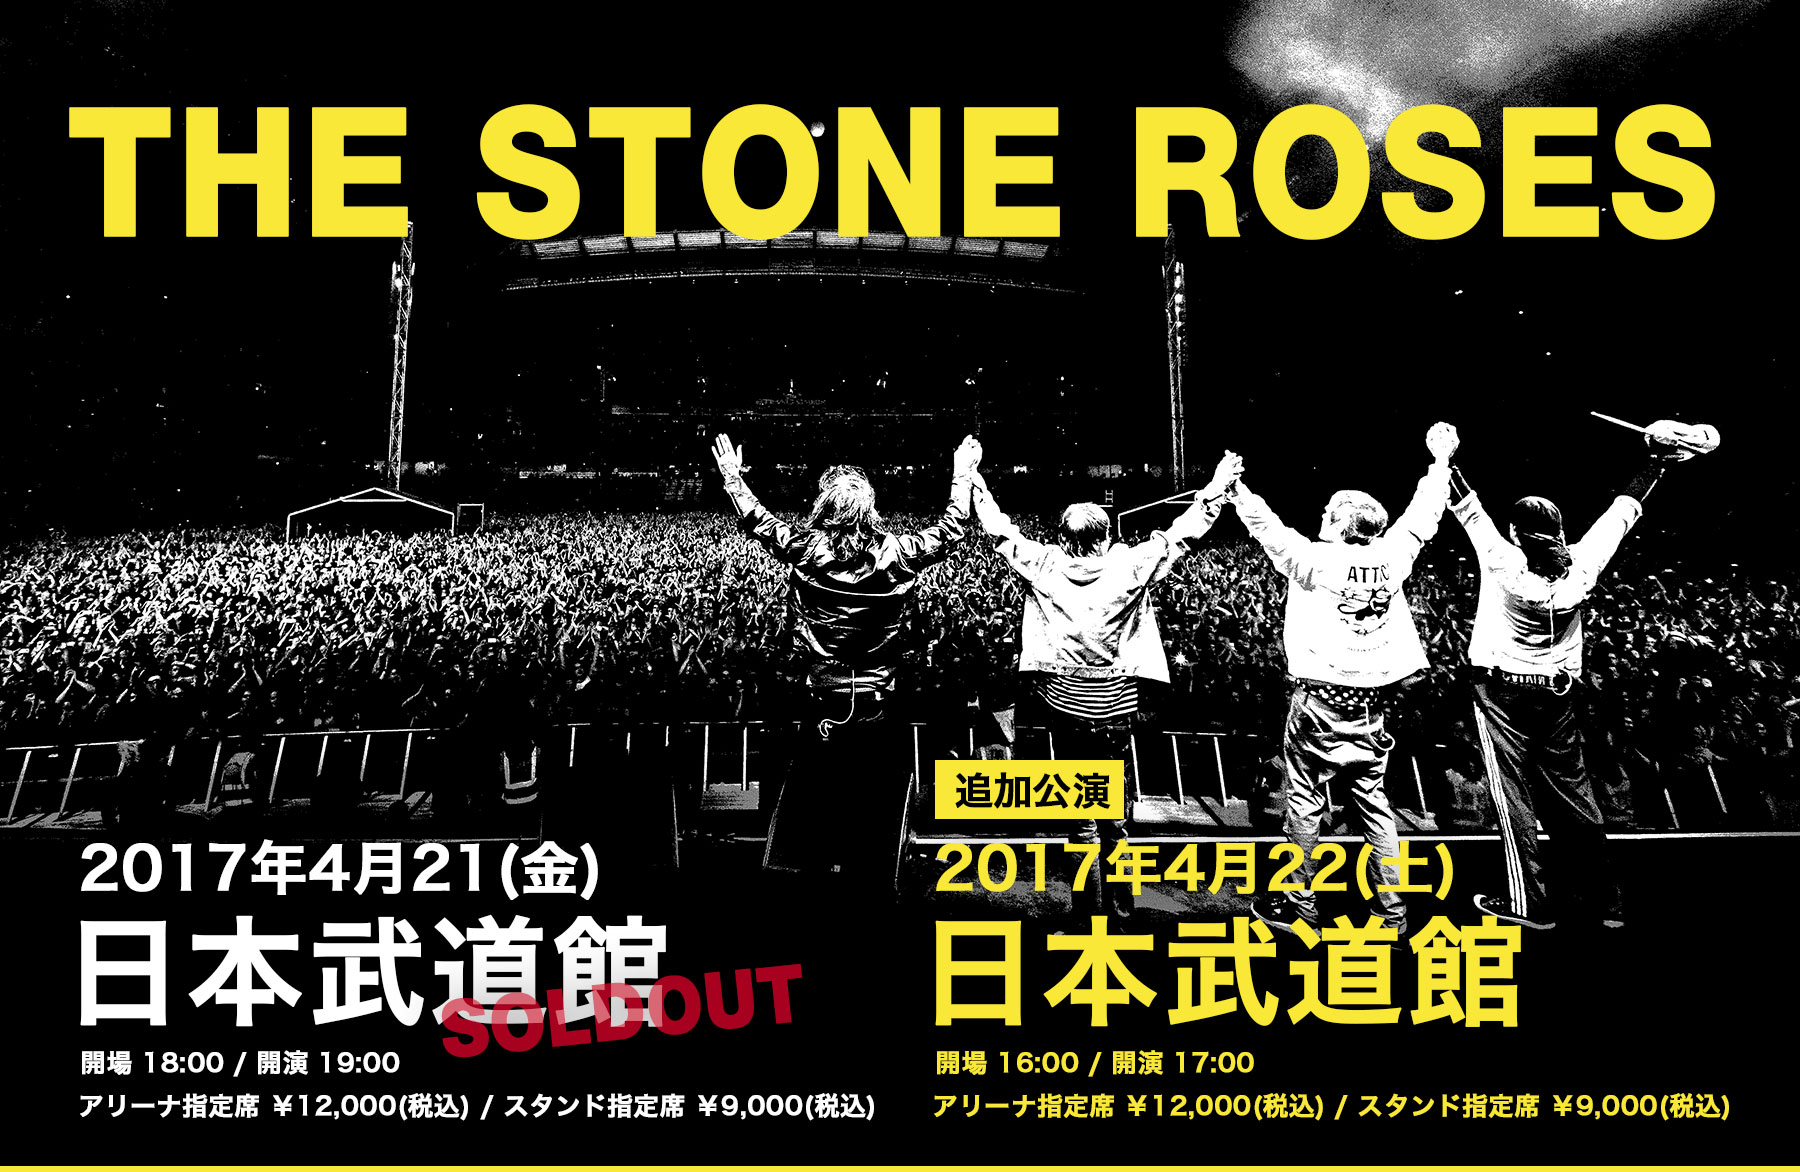 THE STONE ROSES | CREATIVEMAN PRODUCTIONS